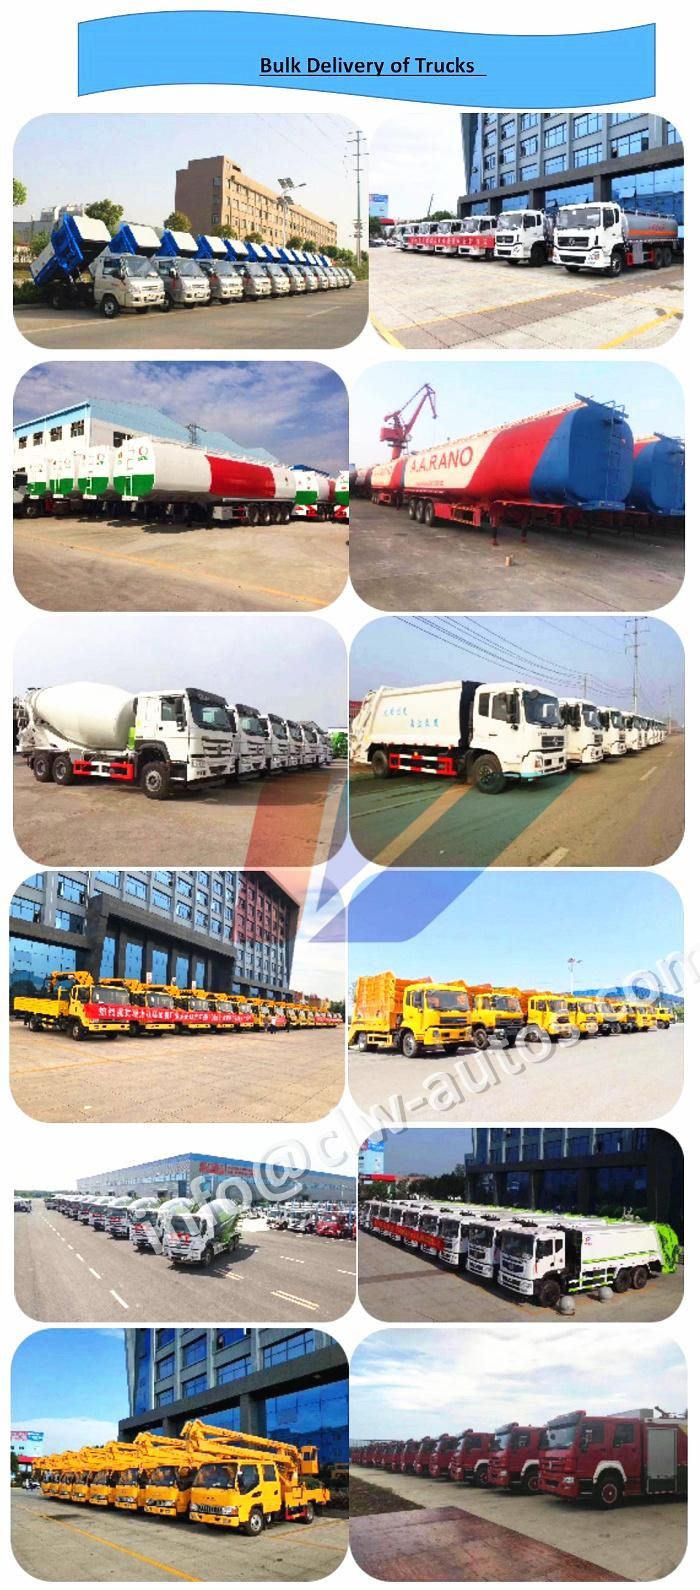 Factory Price HOWO Brand10-12 Cbm 4*2 Compactor Garbage Truck for Refuse Transportation